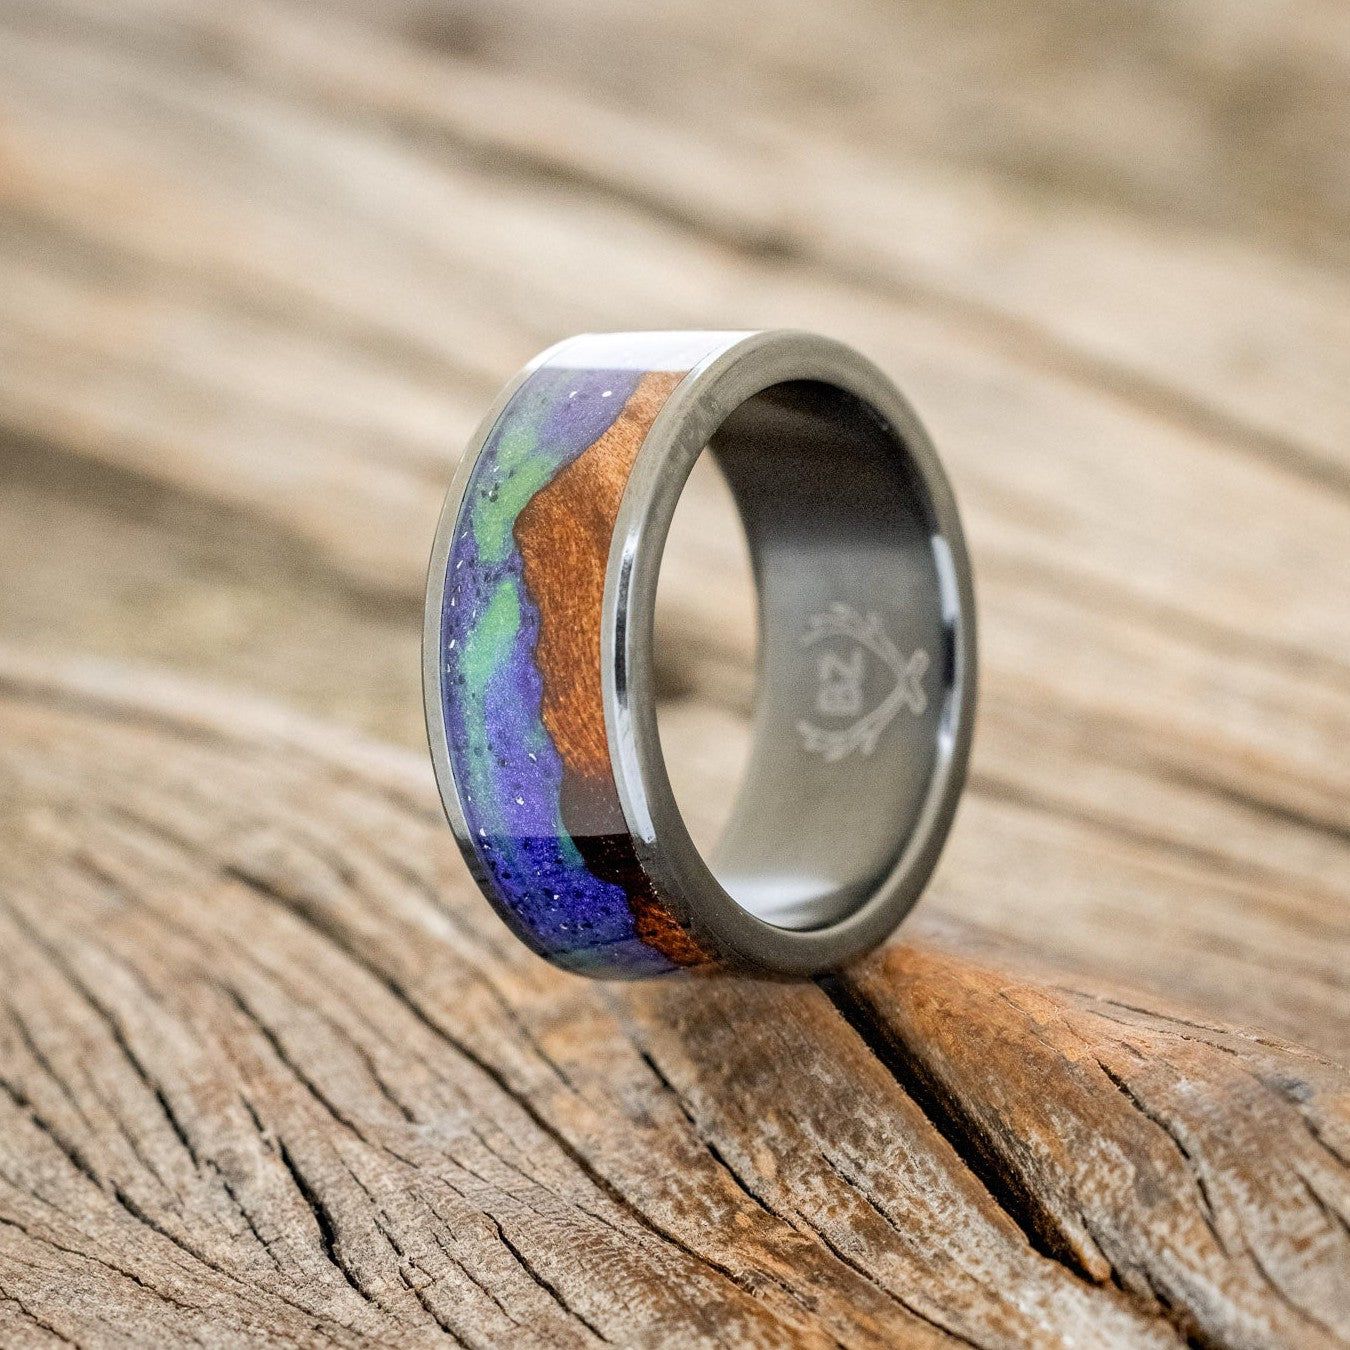 Borealis - Mountain Engraved Wedding Ring with Redwood & Glow in The Dark Northern Lights - by Staghead Designs - 14K Rose Gold - Men's